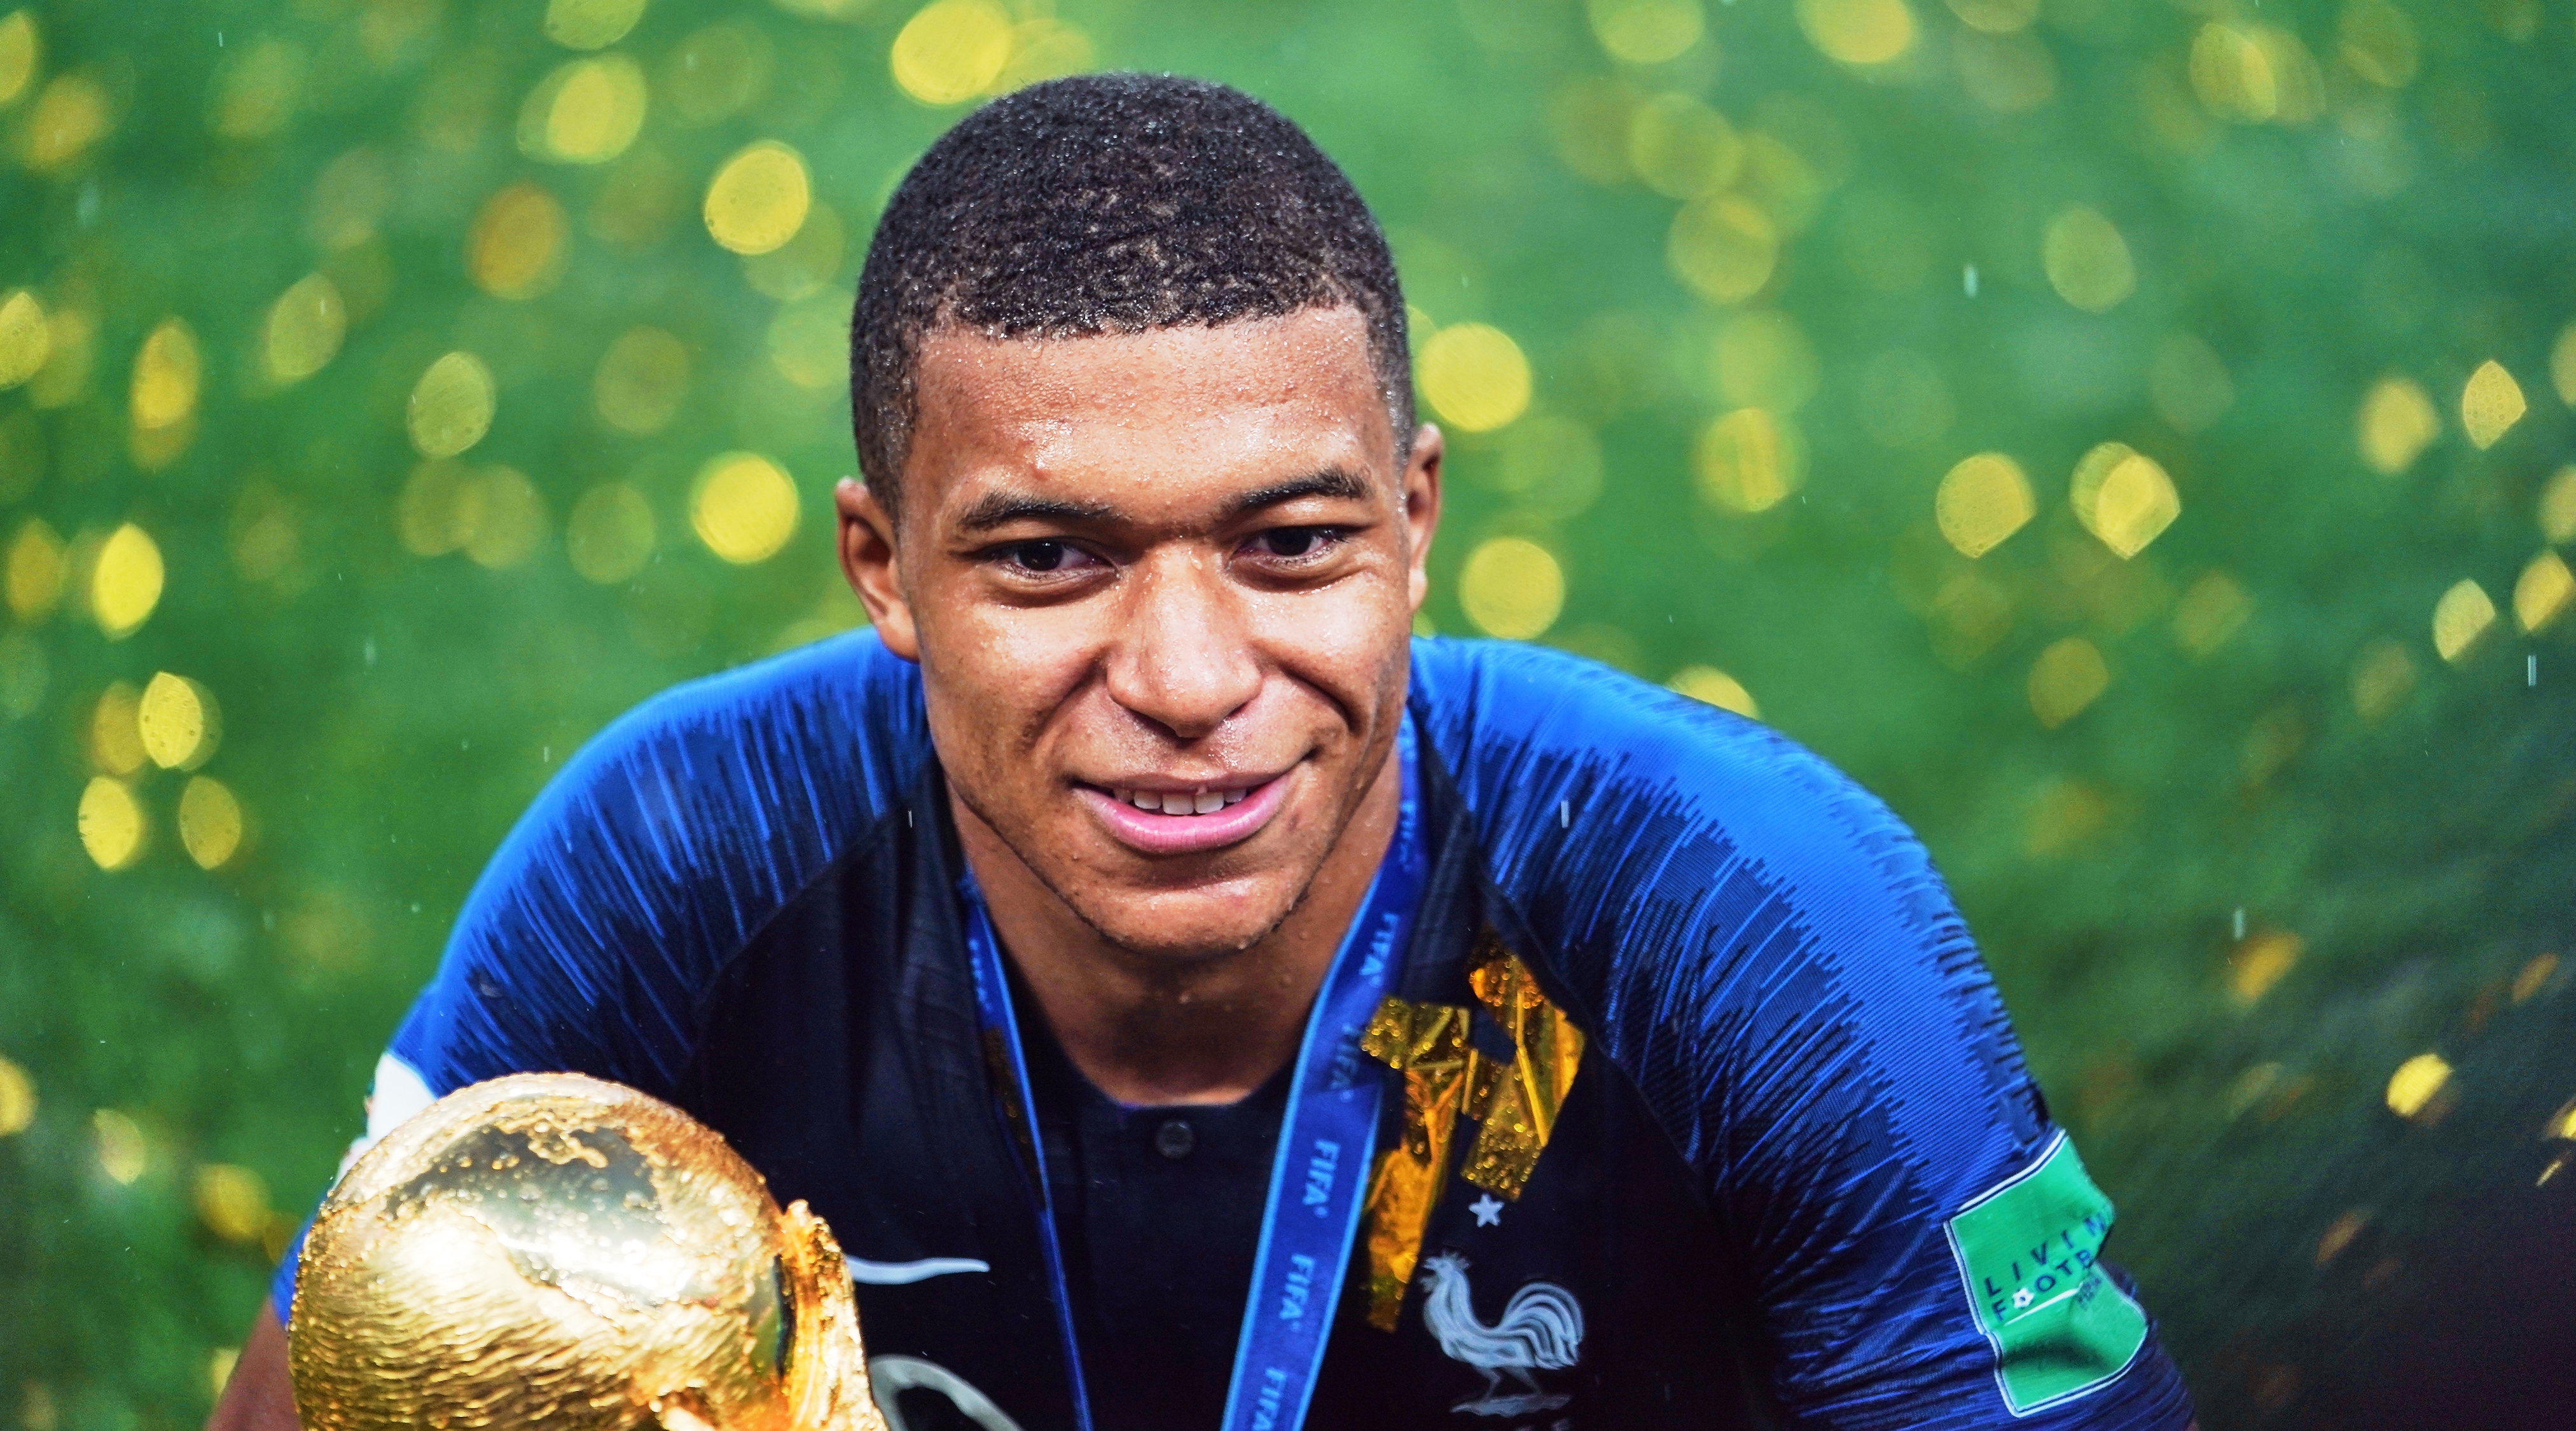 Kylian Mbappé with the world cup trophy the FIFA World Cup match France versus Croatia at Luzhniki Stadium, Moscow, Russia on July 15, 2018. (Photo by Ulrik Pedersen/NurPhoto via Getty Images)